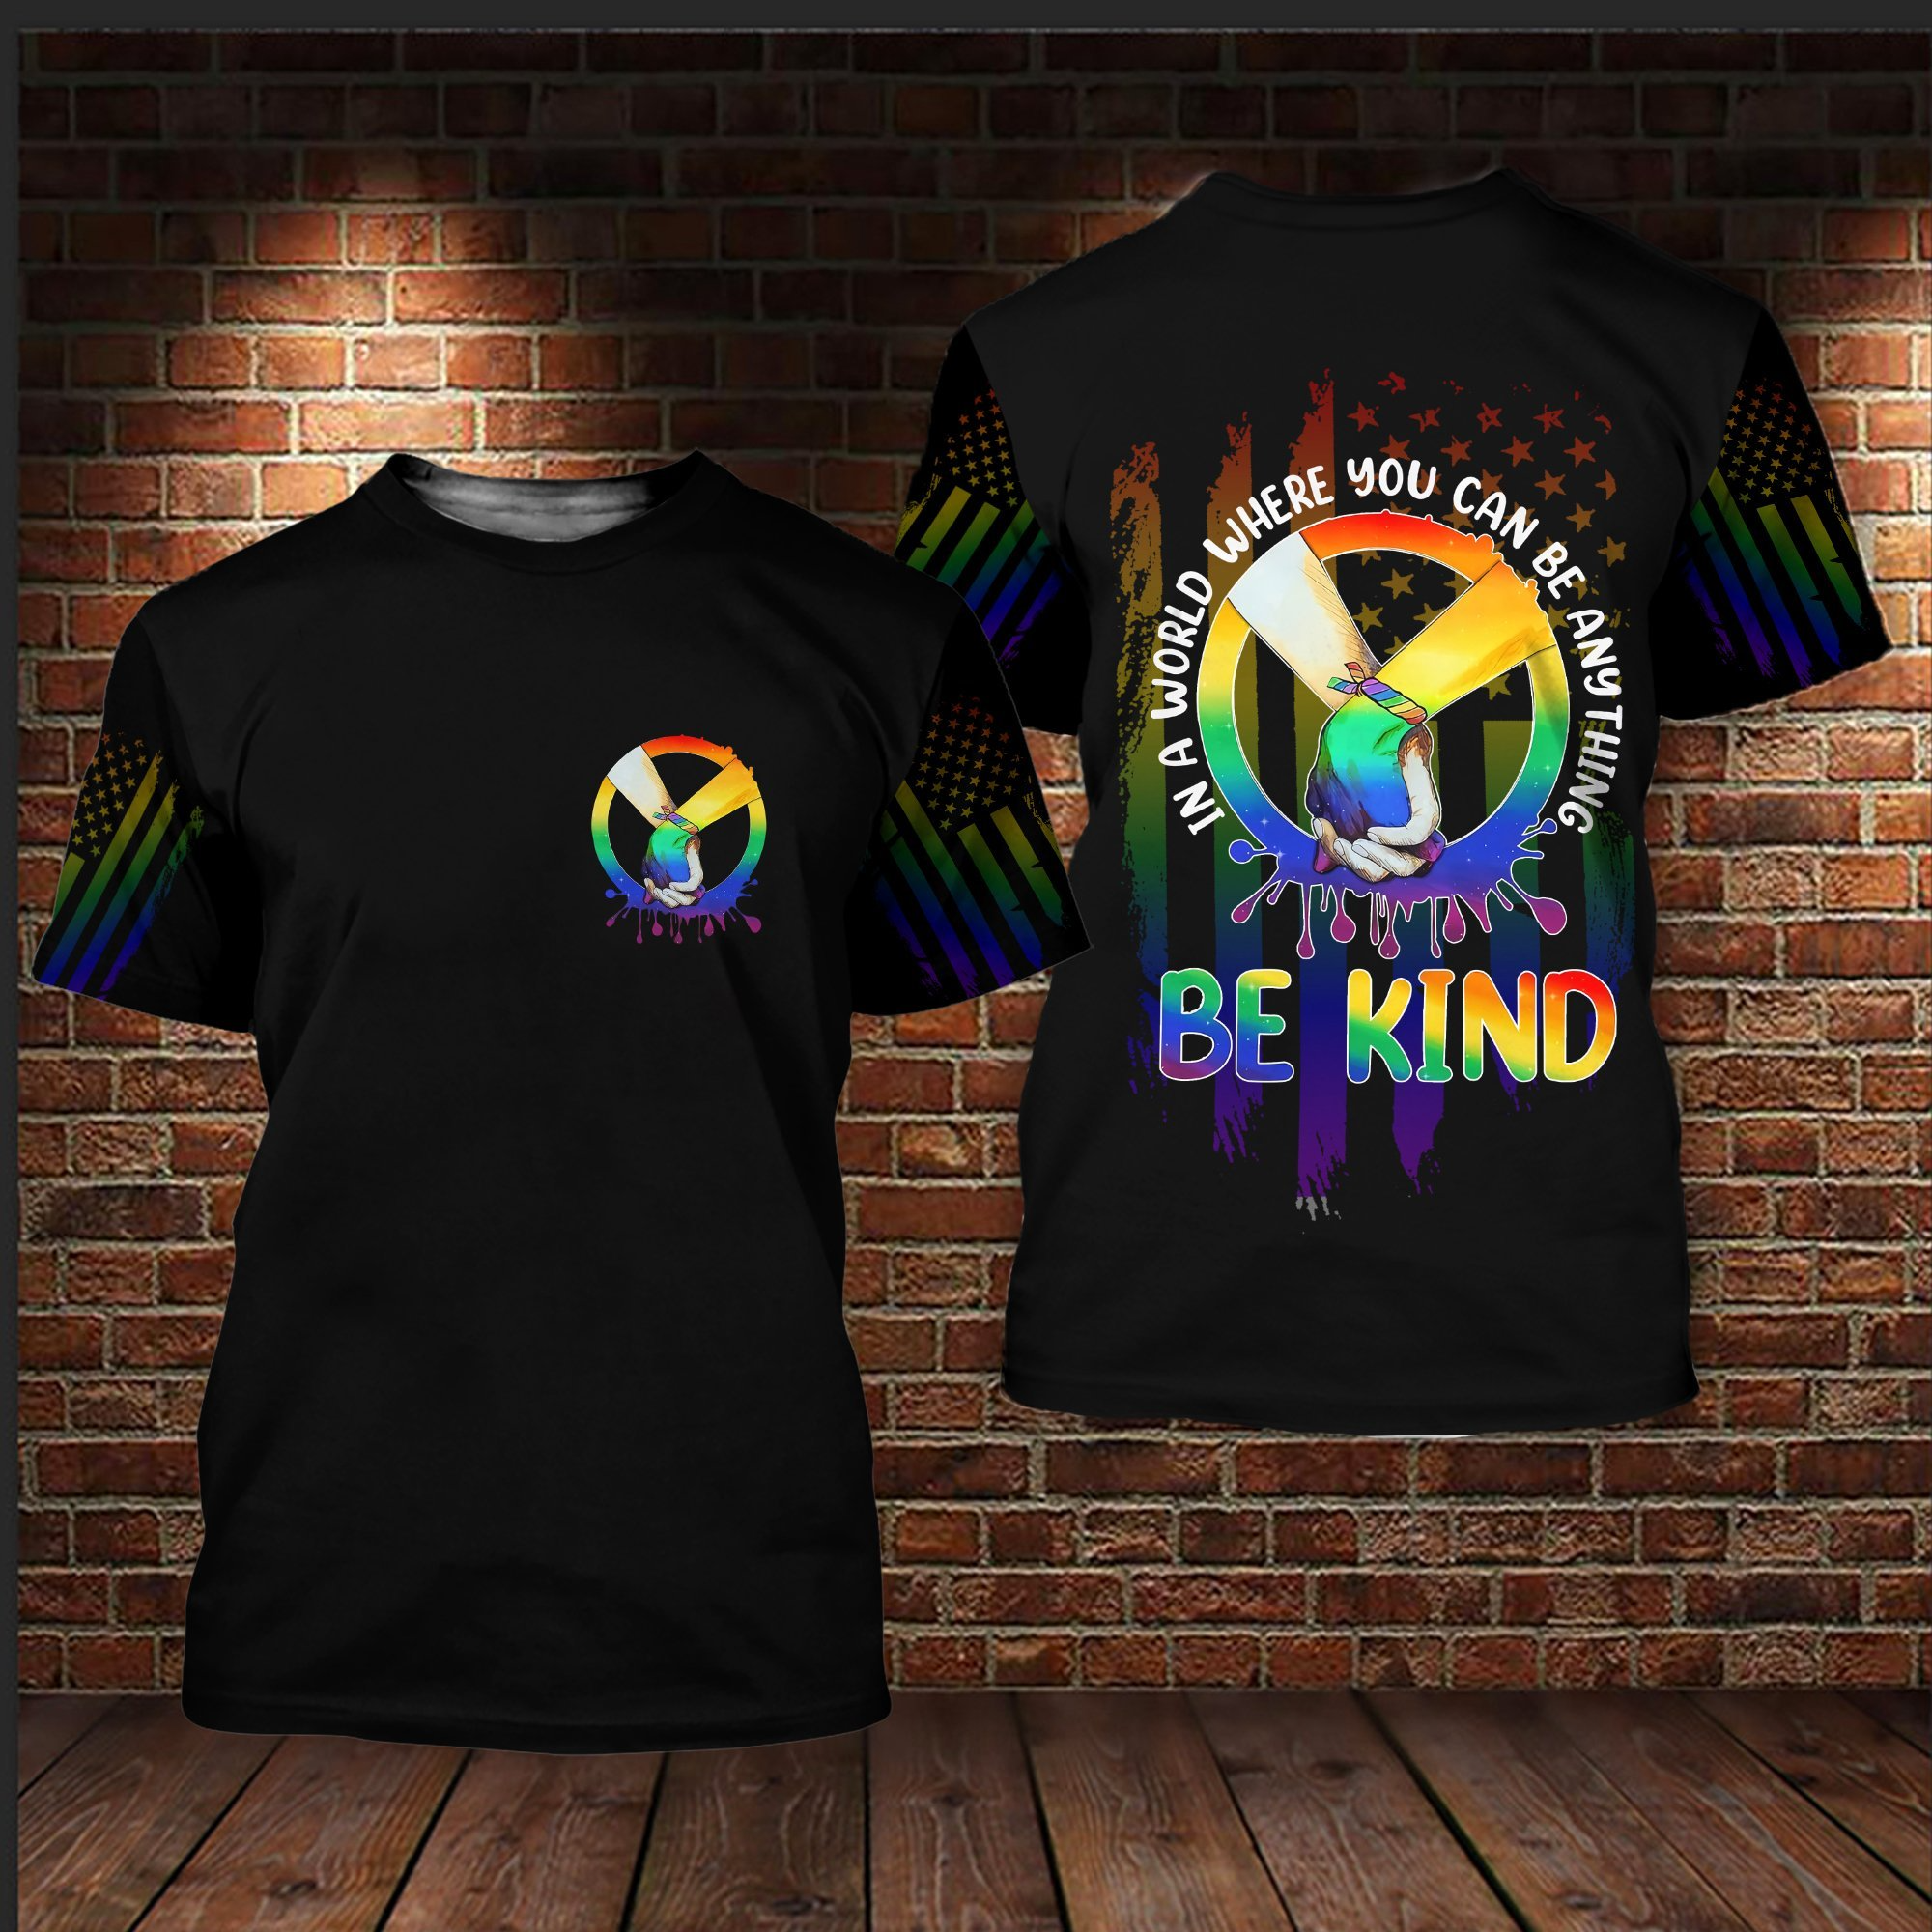 Bisexual Pride Shirt/ In A World Where You Can Be Anything Be Kind/ Gift For LGBT Pride Month